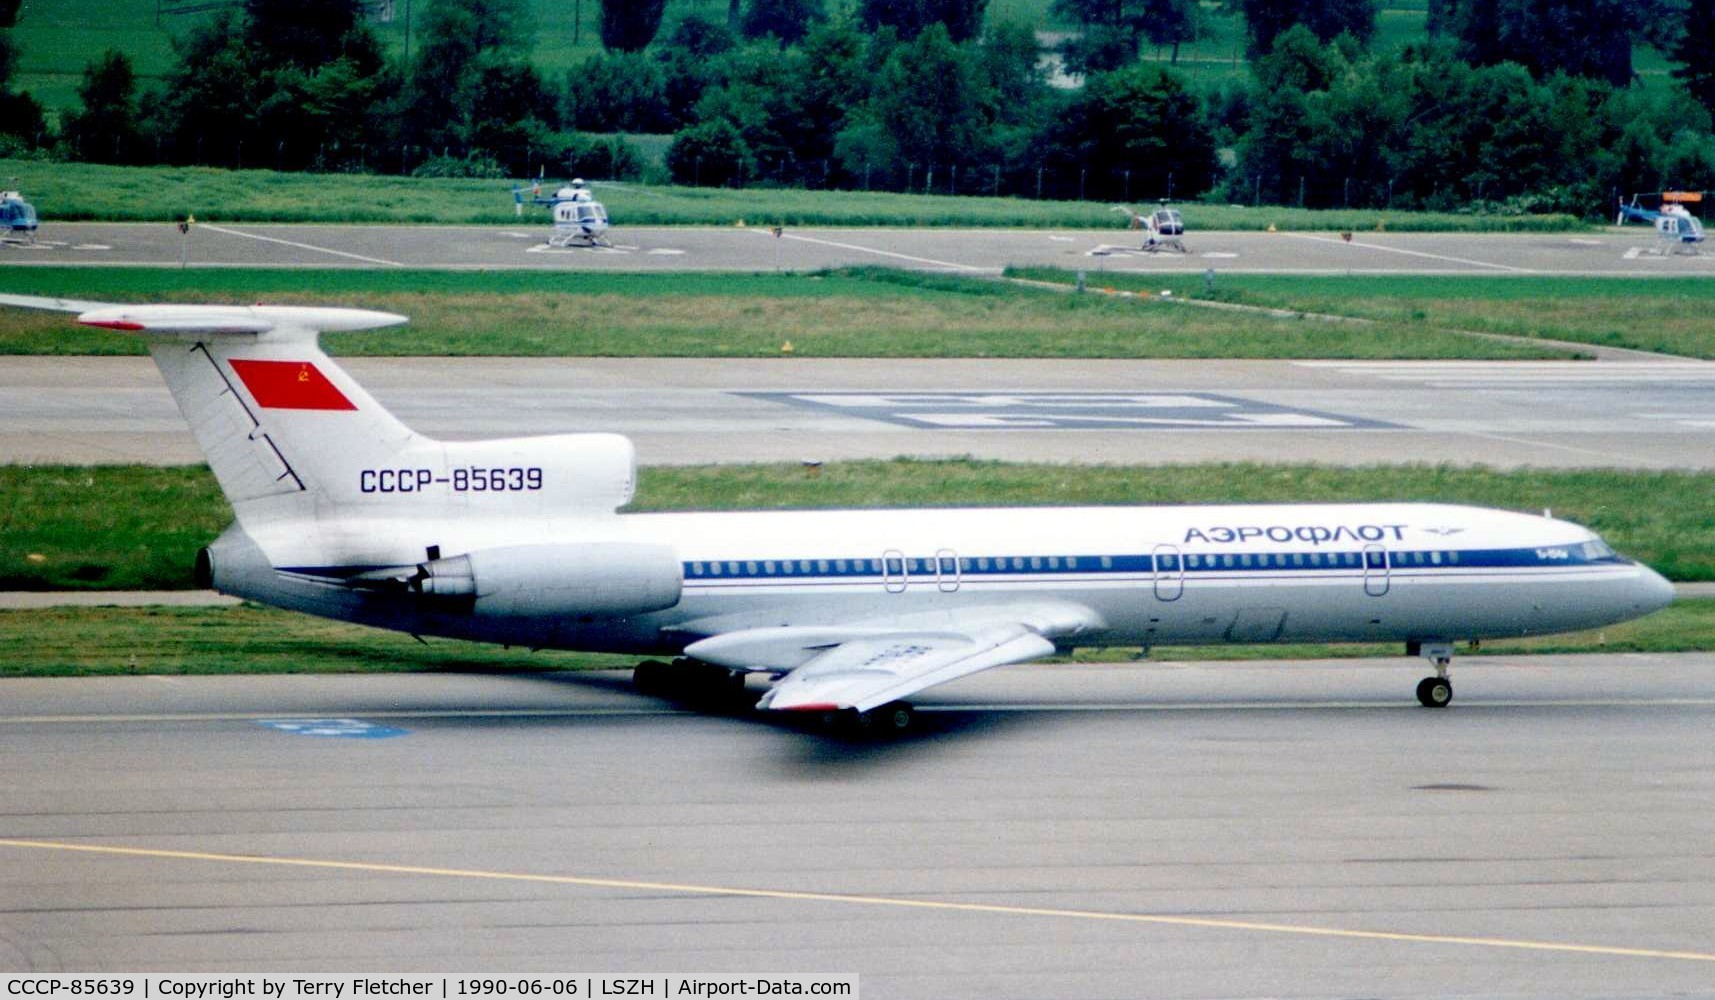 CCCP-85639, 1988 Tupolev Tu-154M C/N 88A771, Tu154 in old Aeroflot colours taxying out at Zurich in 1990